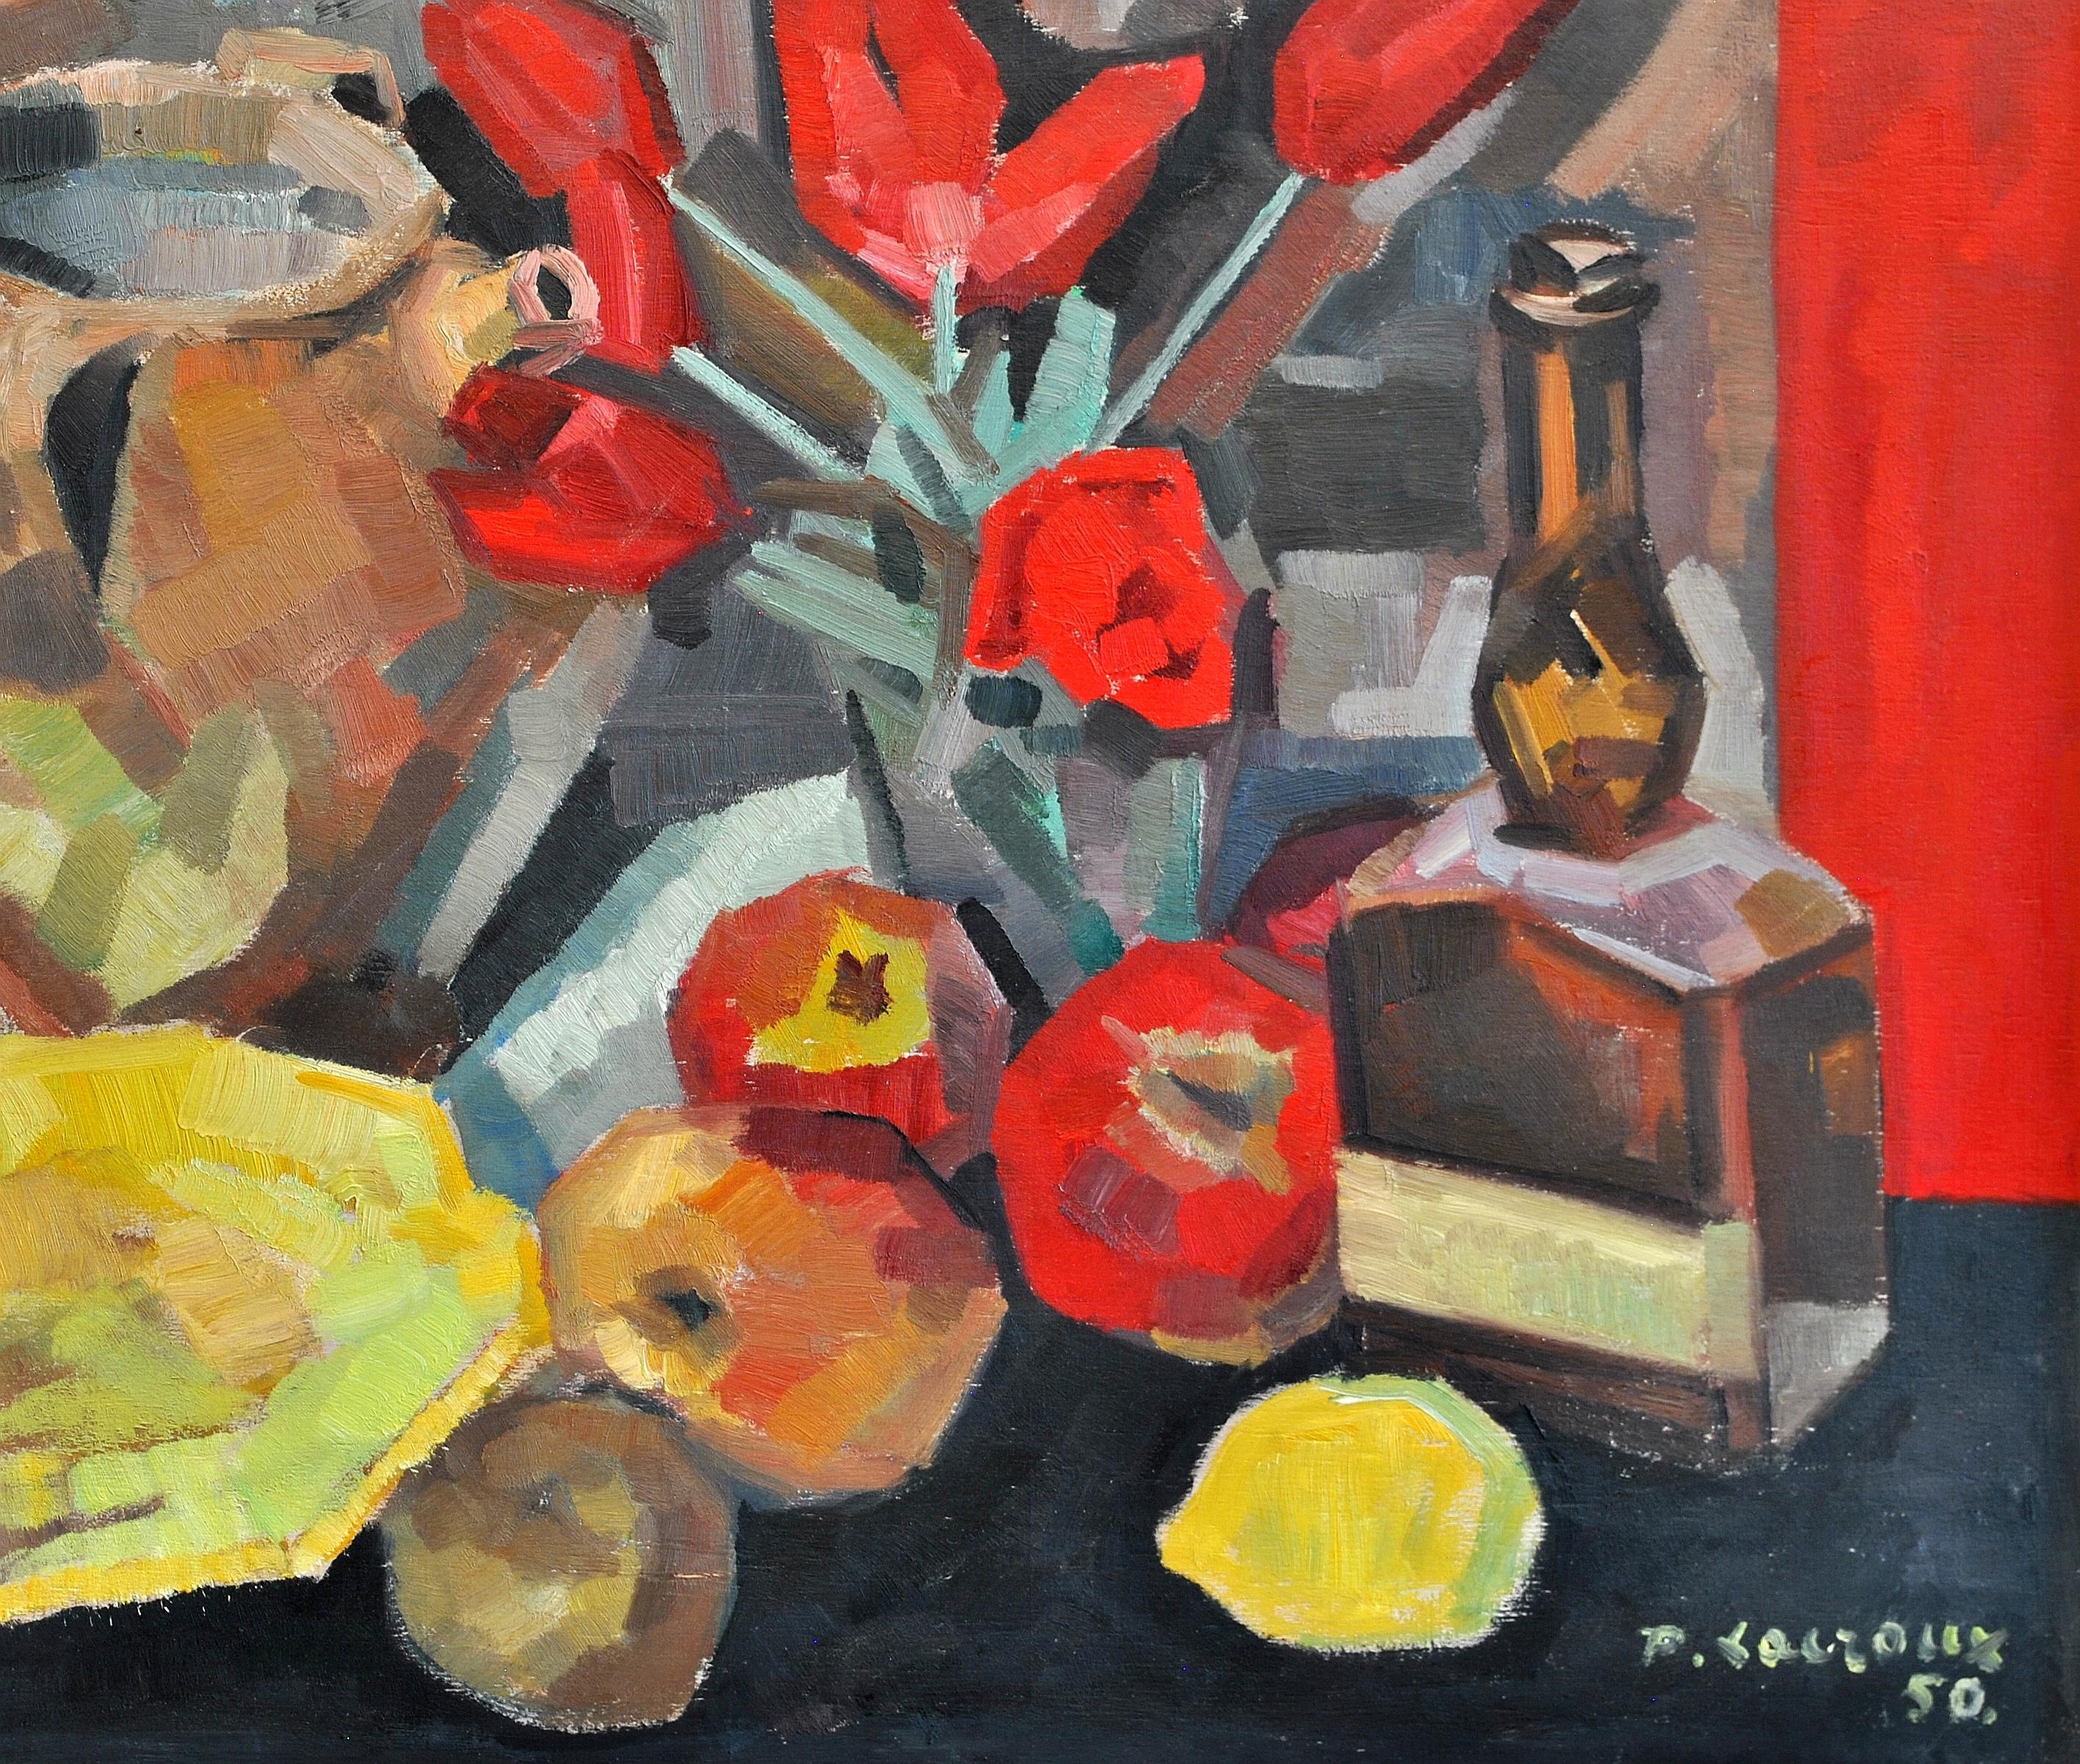 A beautiful signed and dated 1950 French cubist oil on panel still life with tulips by Pierre Lacroux. Excellent quality still life painting in very good condition by this well listed French artist. 

The work is signed and dated lower right and